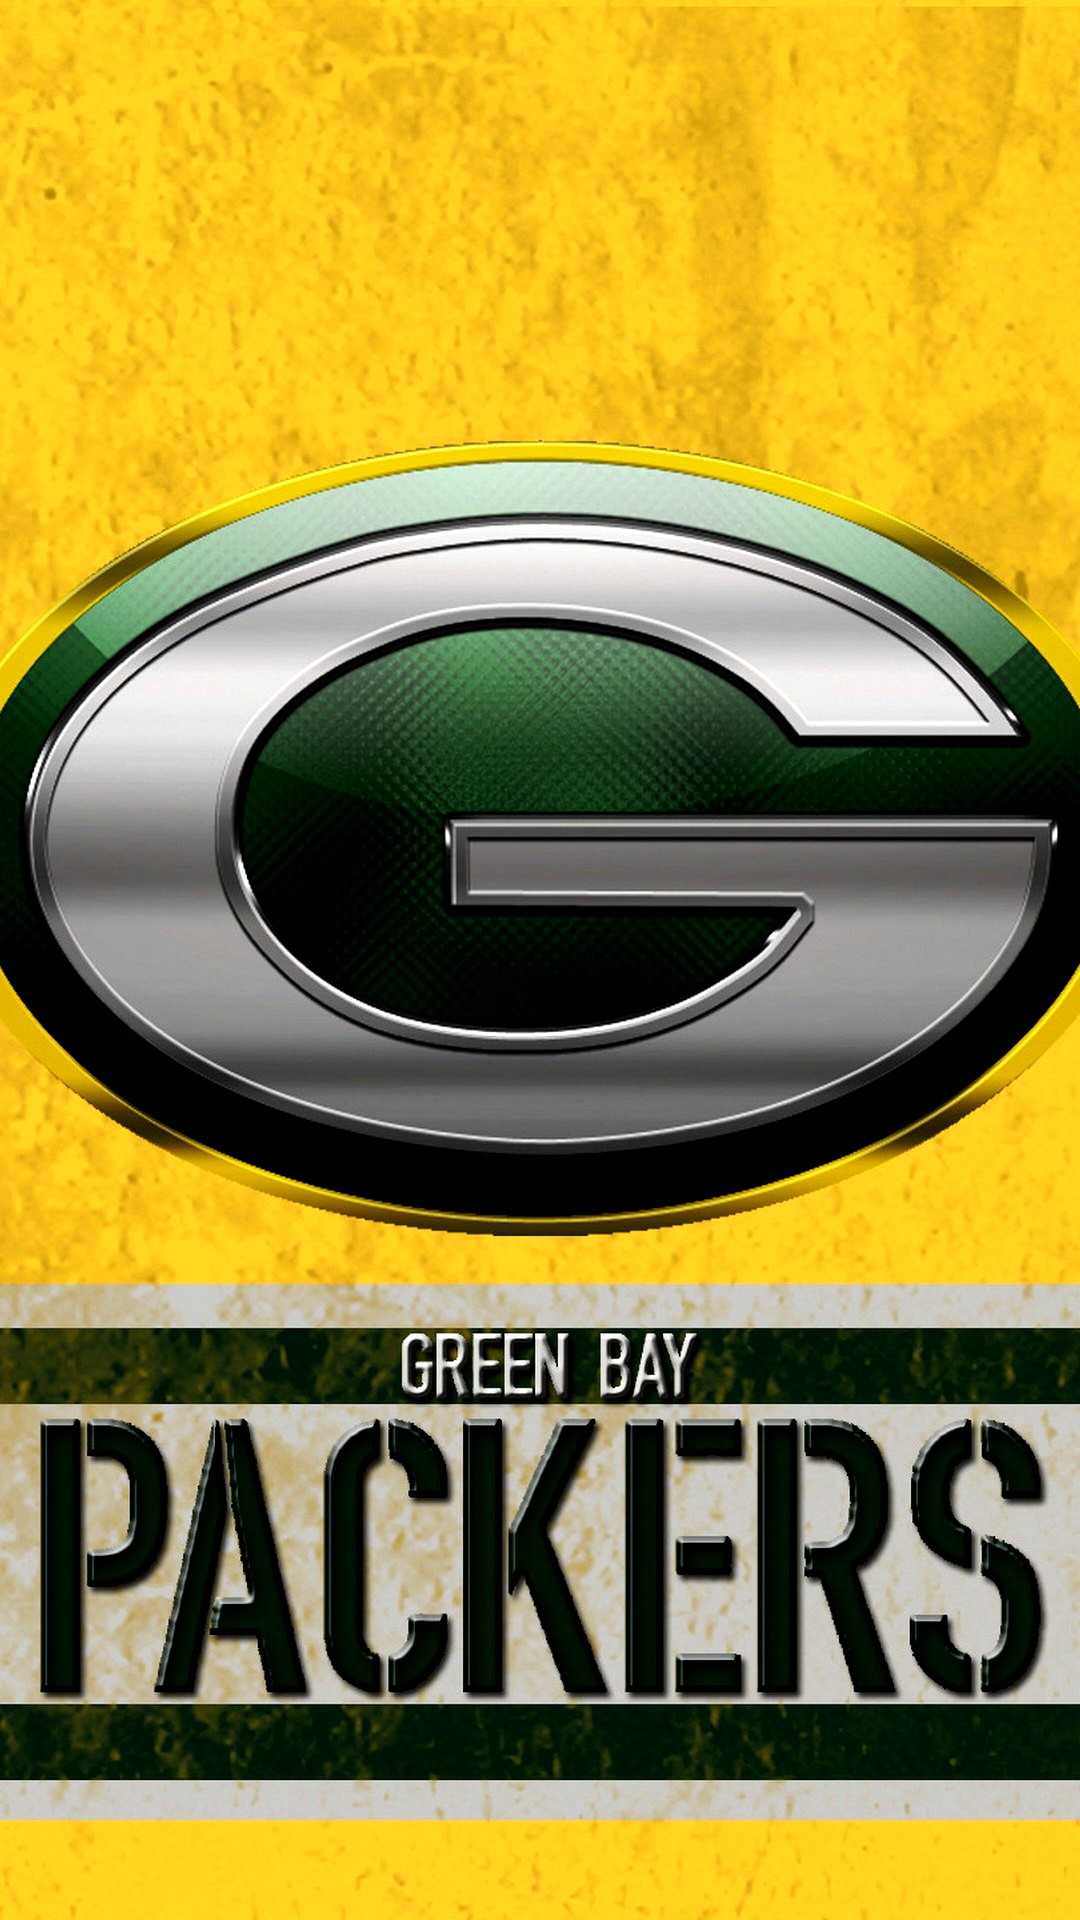 Green Bay Packers Android Wallpaper HD 2022